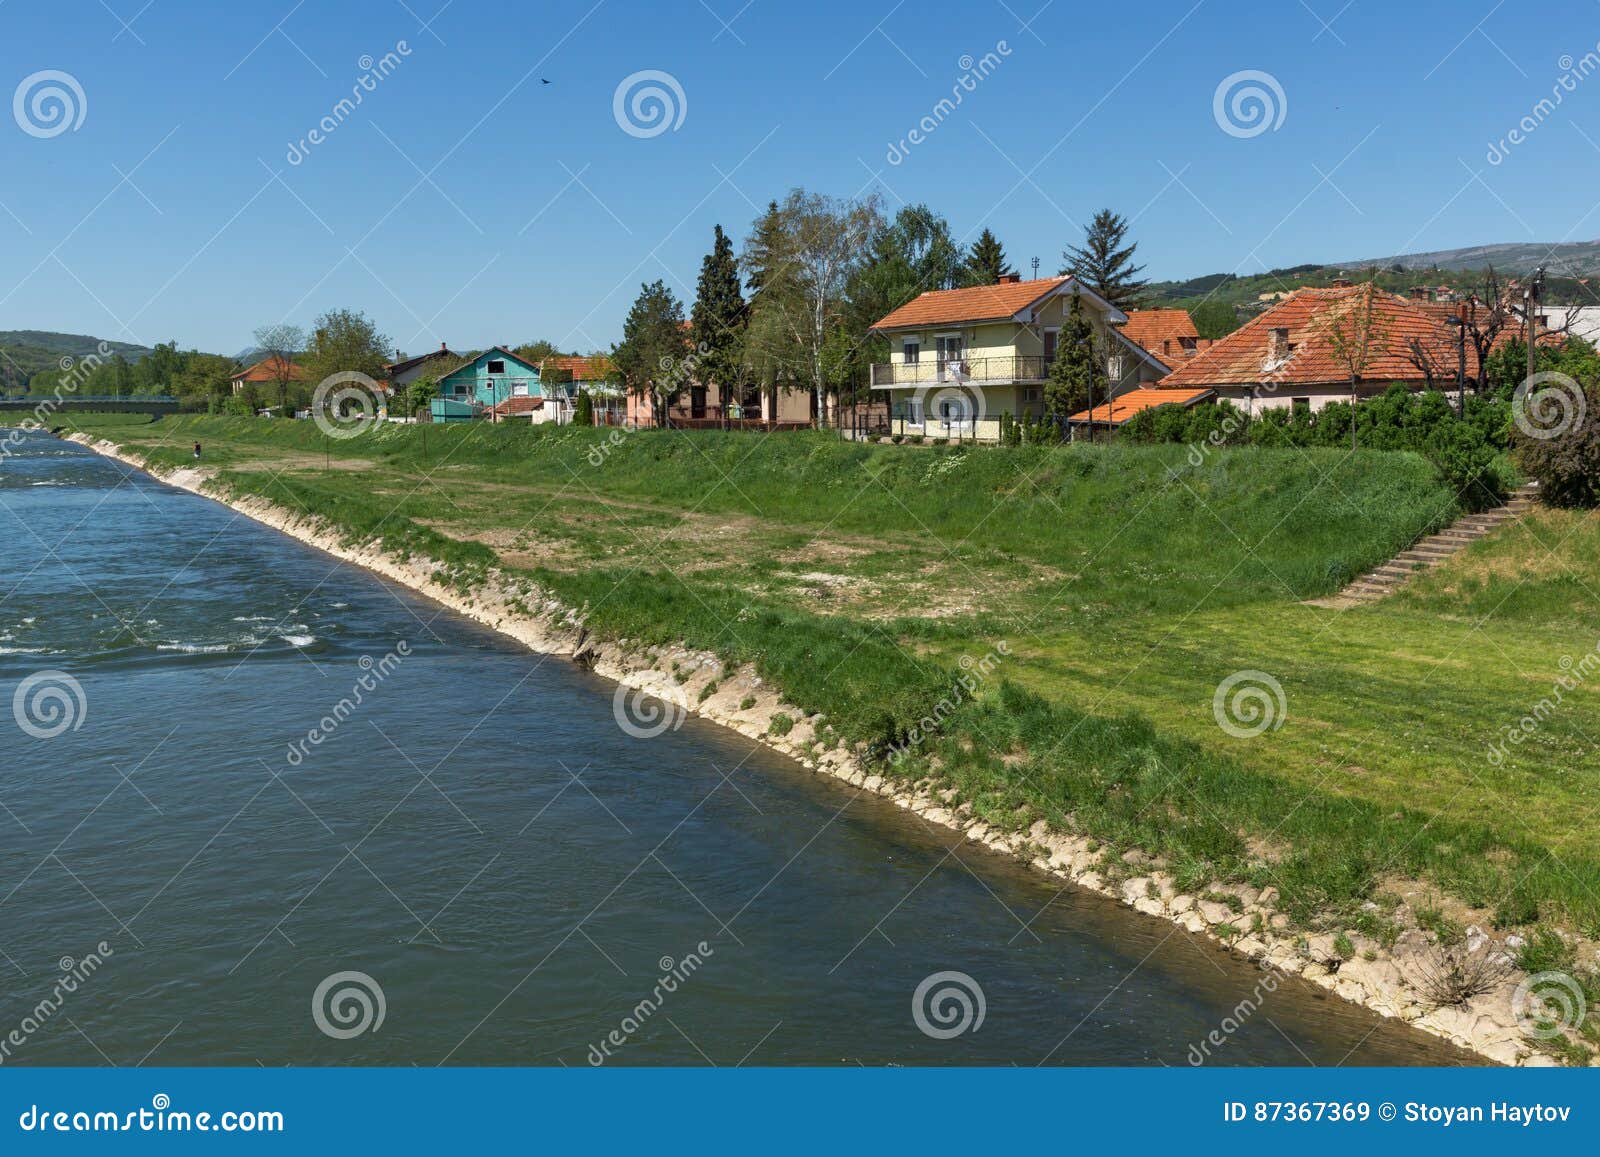 amazing view of nisava river passing through the town of pirot, serbia